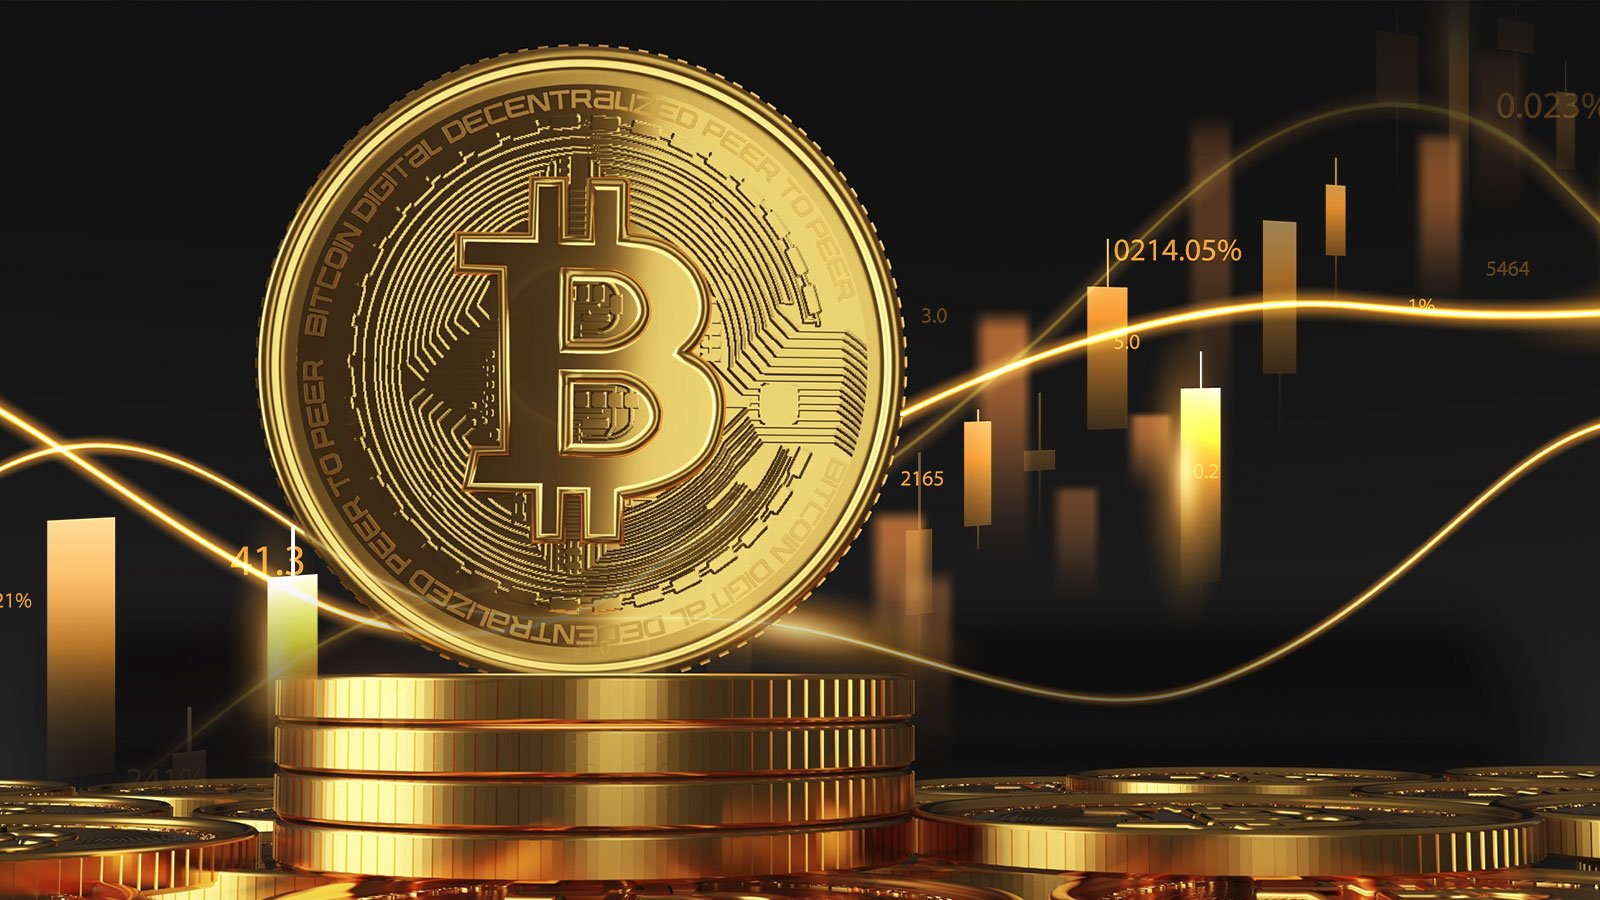 Bitcoin (BTC) Prints New Price ATH: What Are Key Reasons?